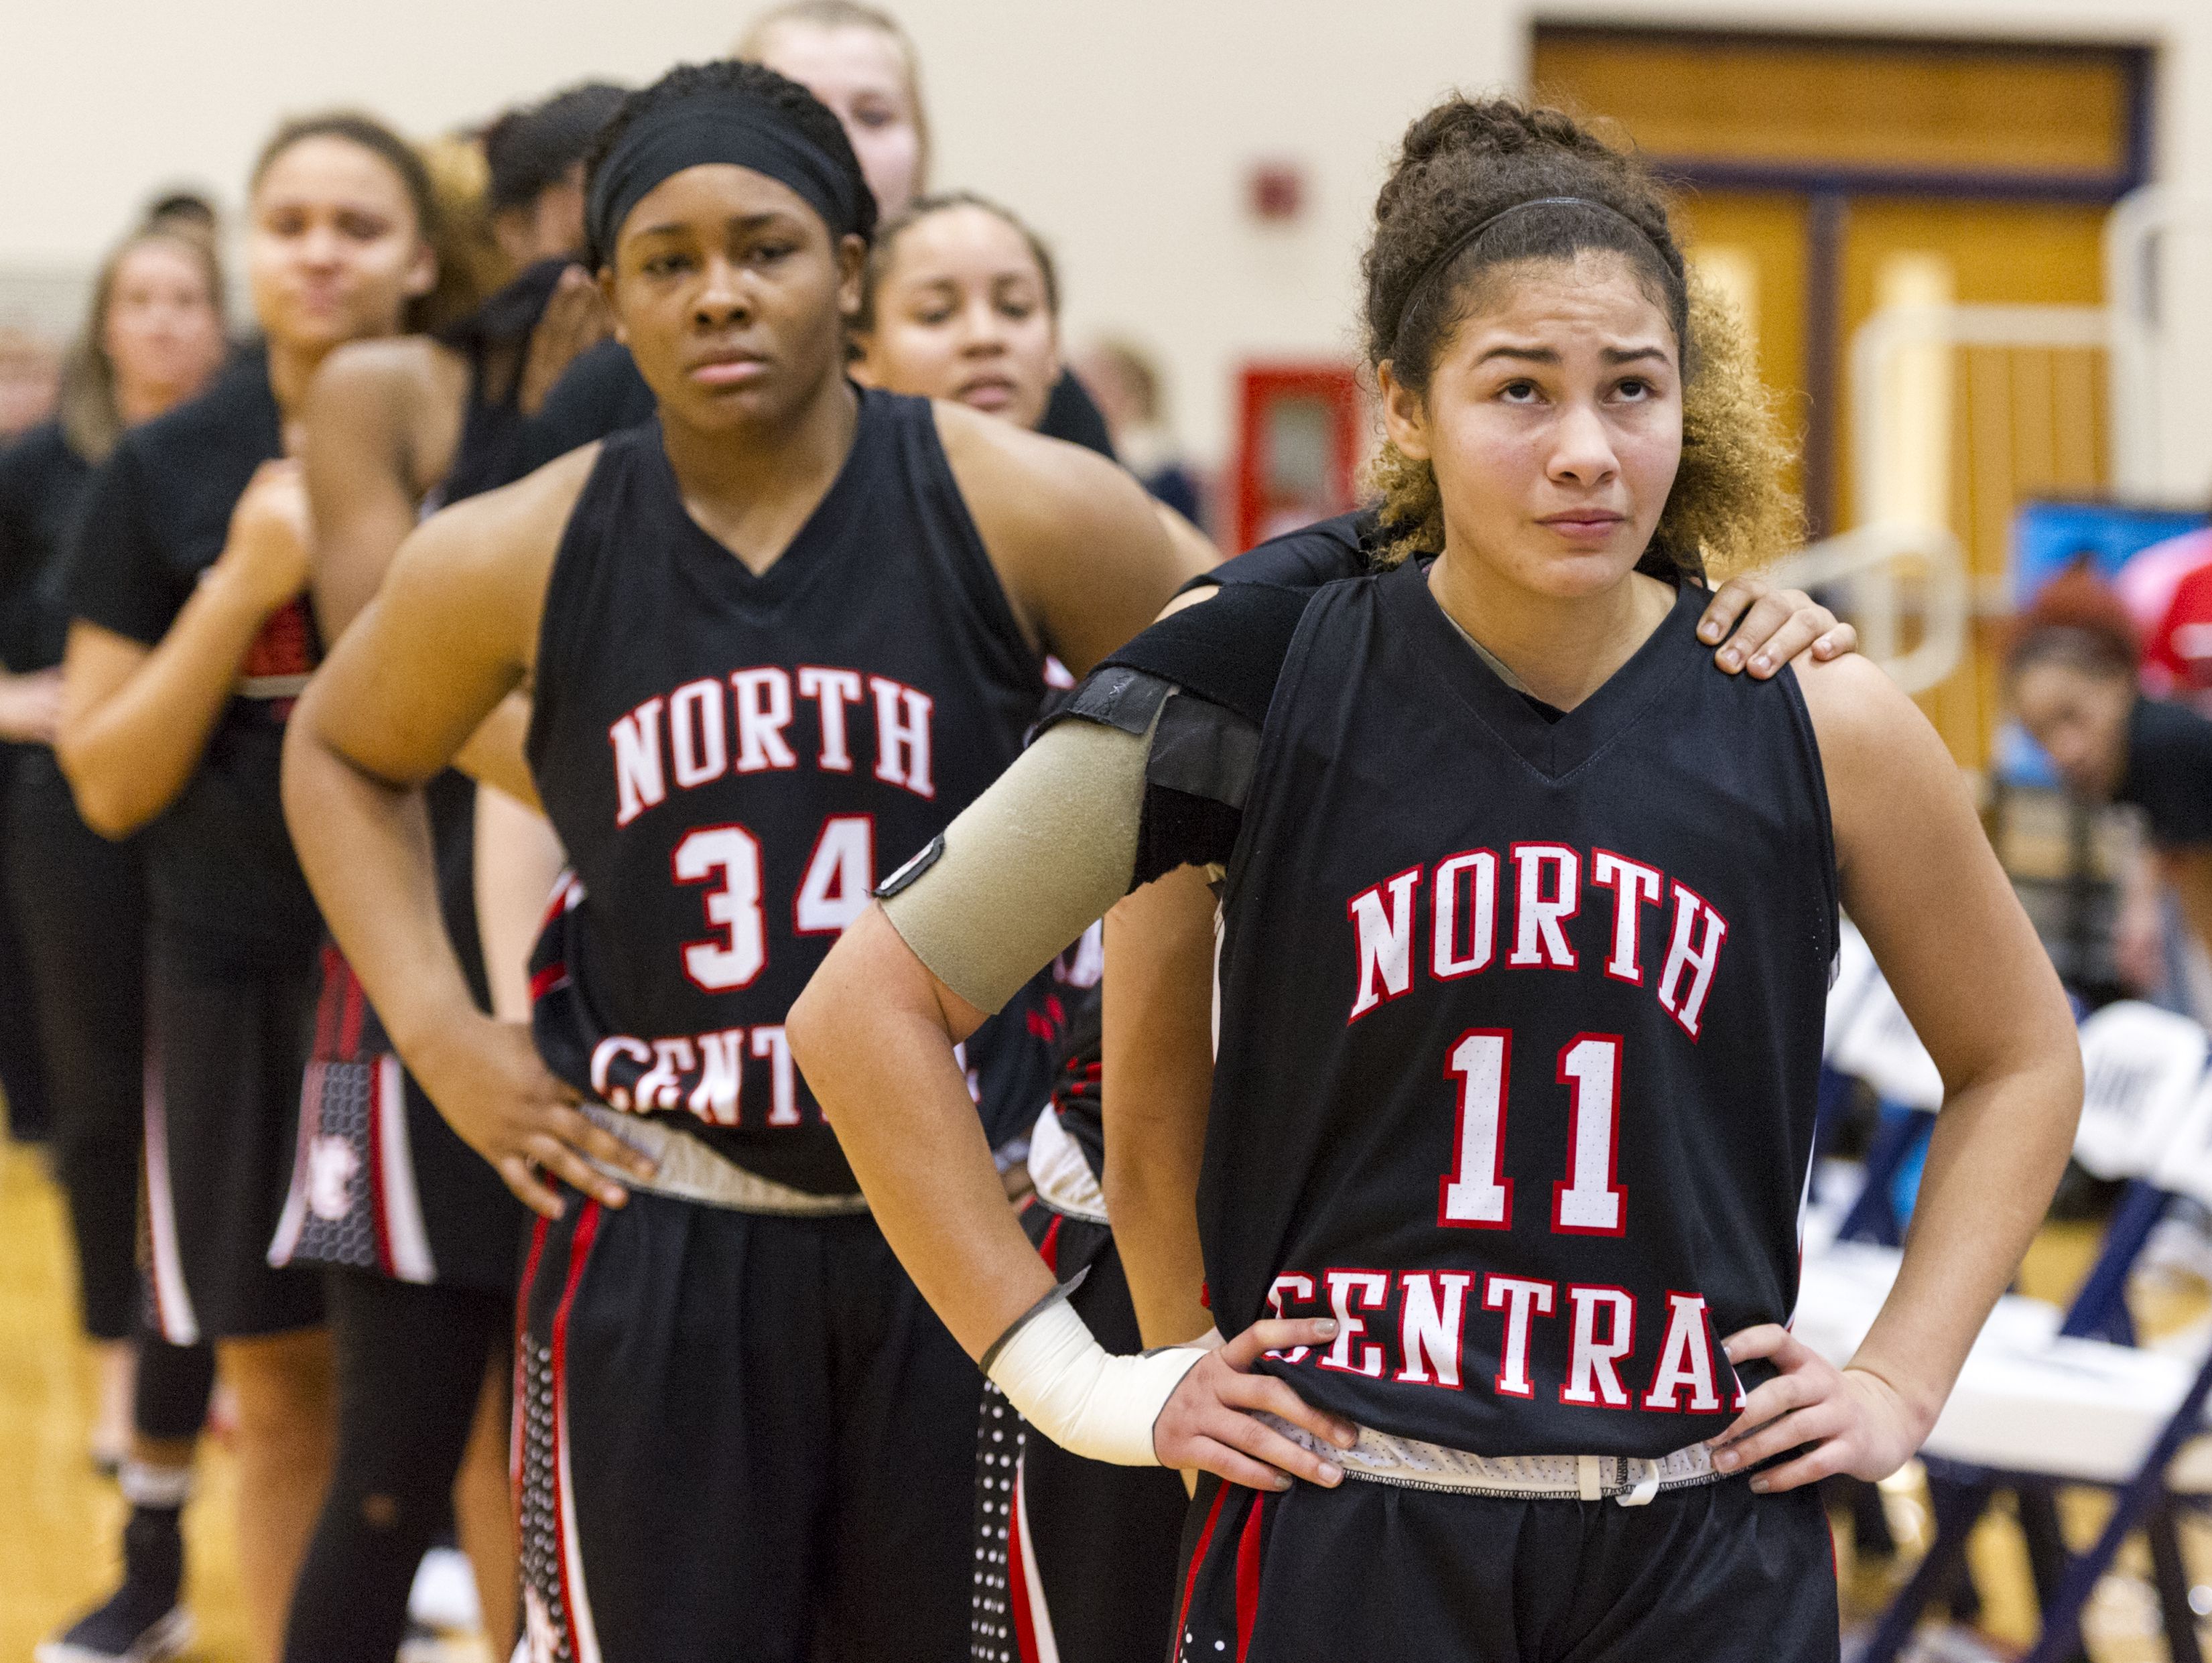 North Central junior Taylor Ramey (11) and her teammates react to their loss of the IHSAA 4A Girls' Basketball Tournament Regional championship game, Saturday at Decatur Central High School.